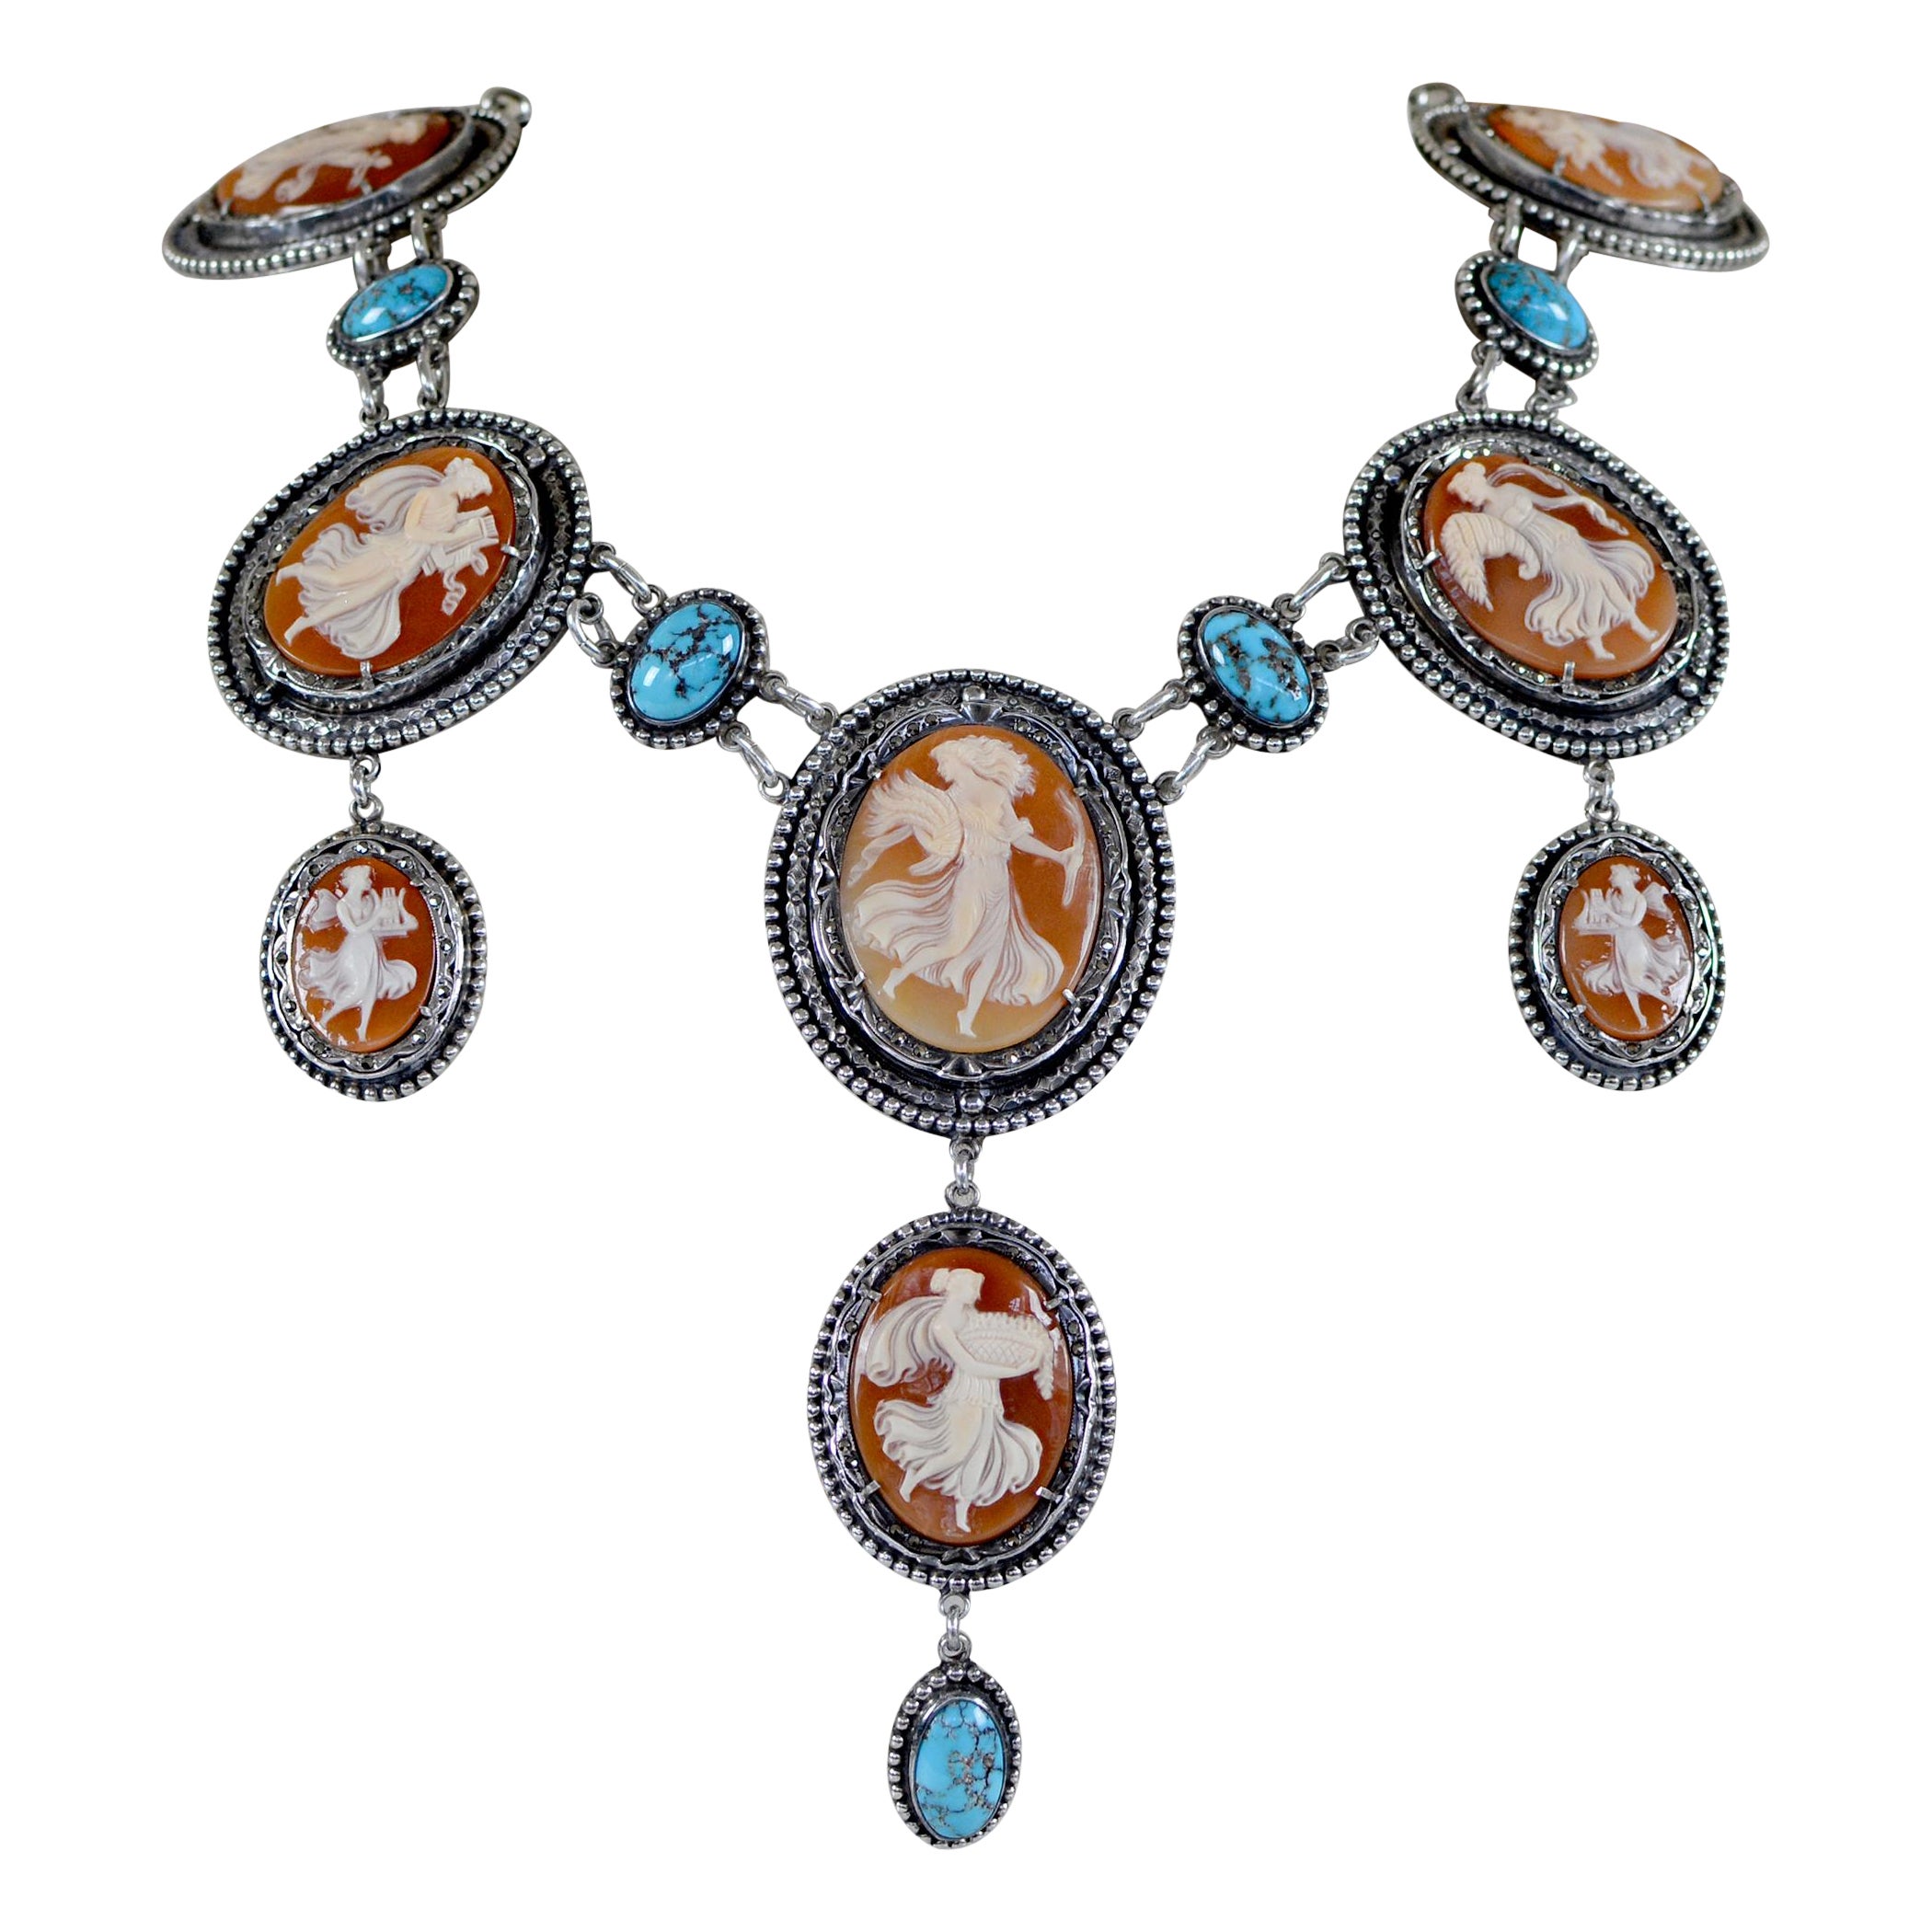 Jill Garber 19th. C. Terpsichore Cameo Suite Necklace with Persian Turquoise 